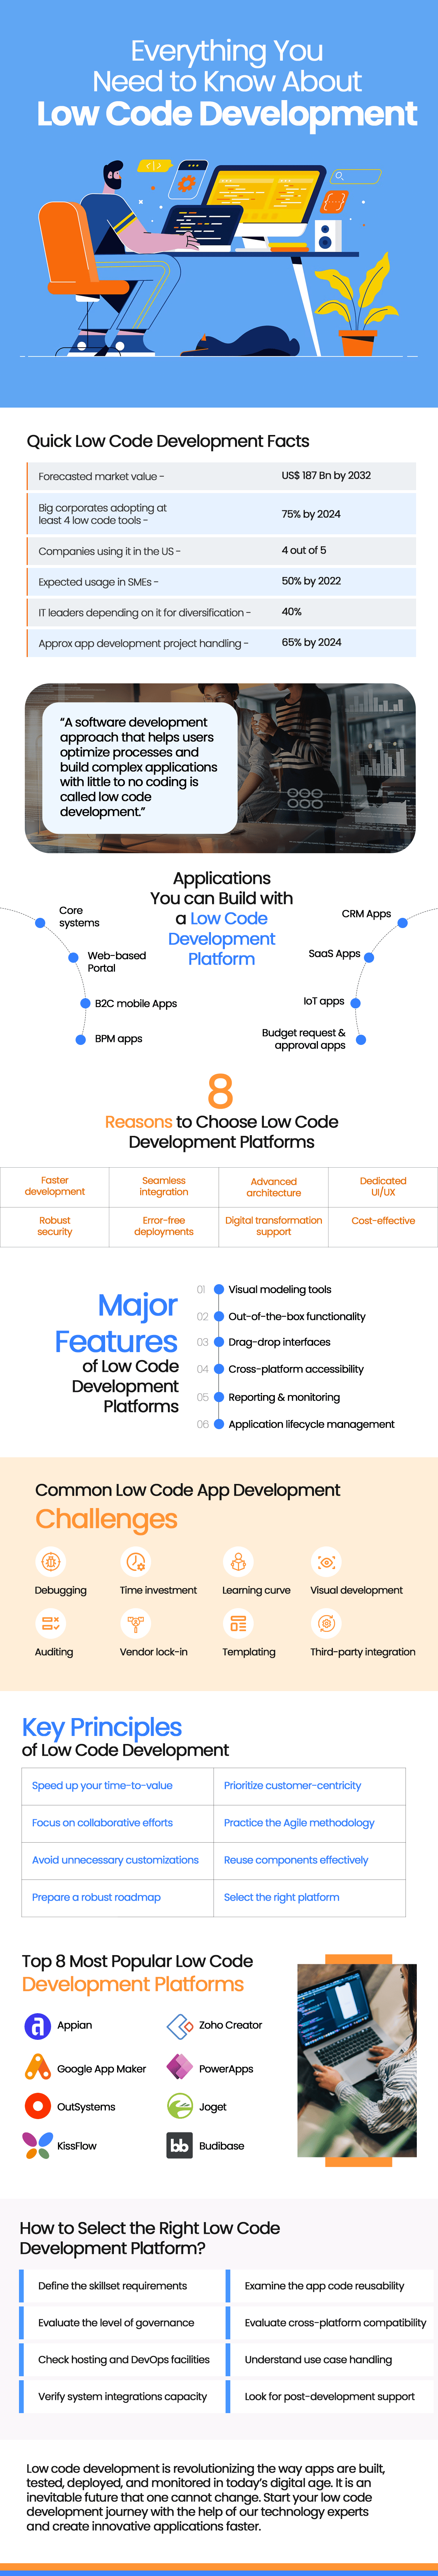 Everything you need to know about Low Code Development Infographic